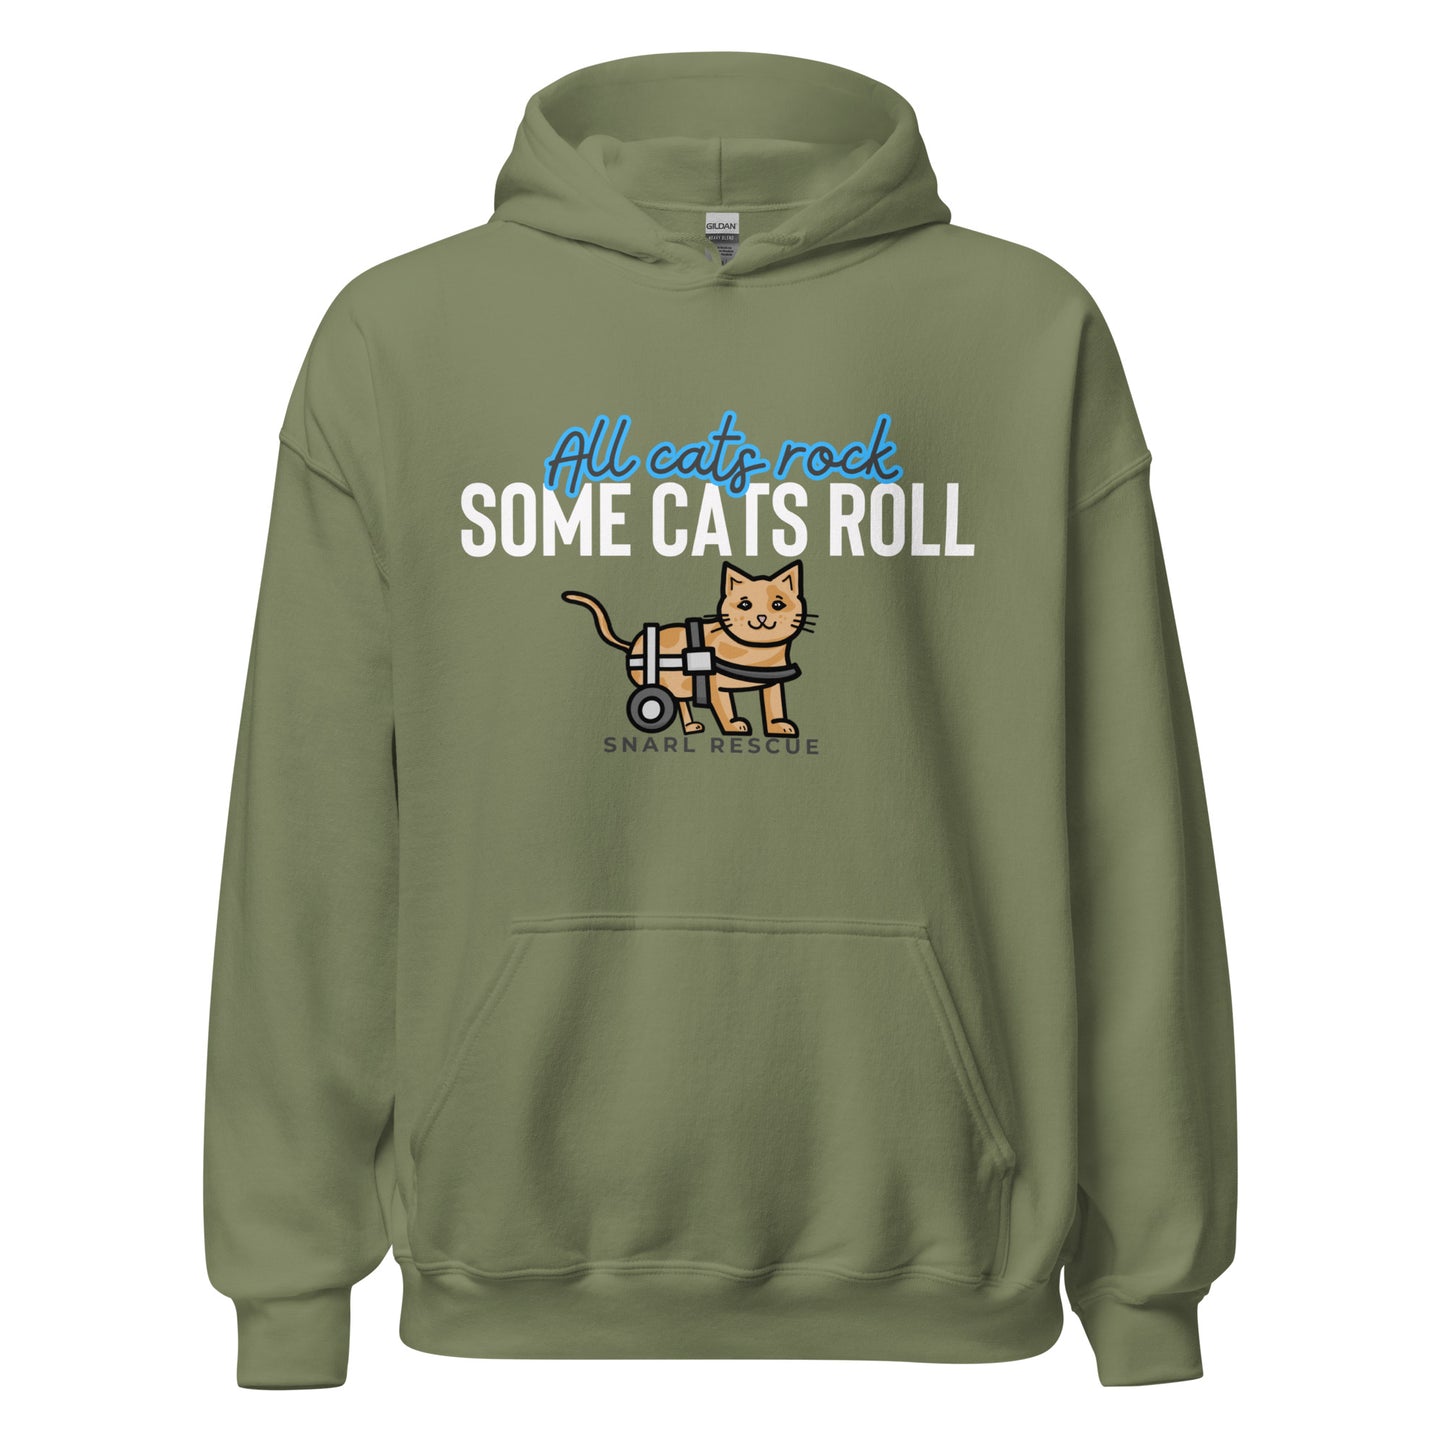 The "All Cats Rock, Some Cats Roll" Hoodie